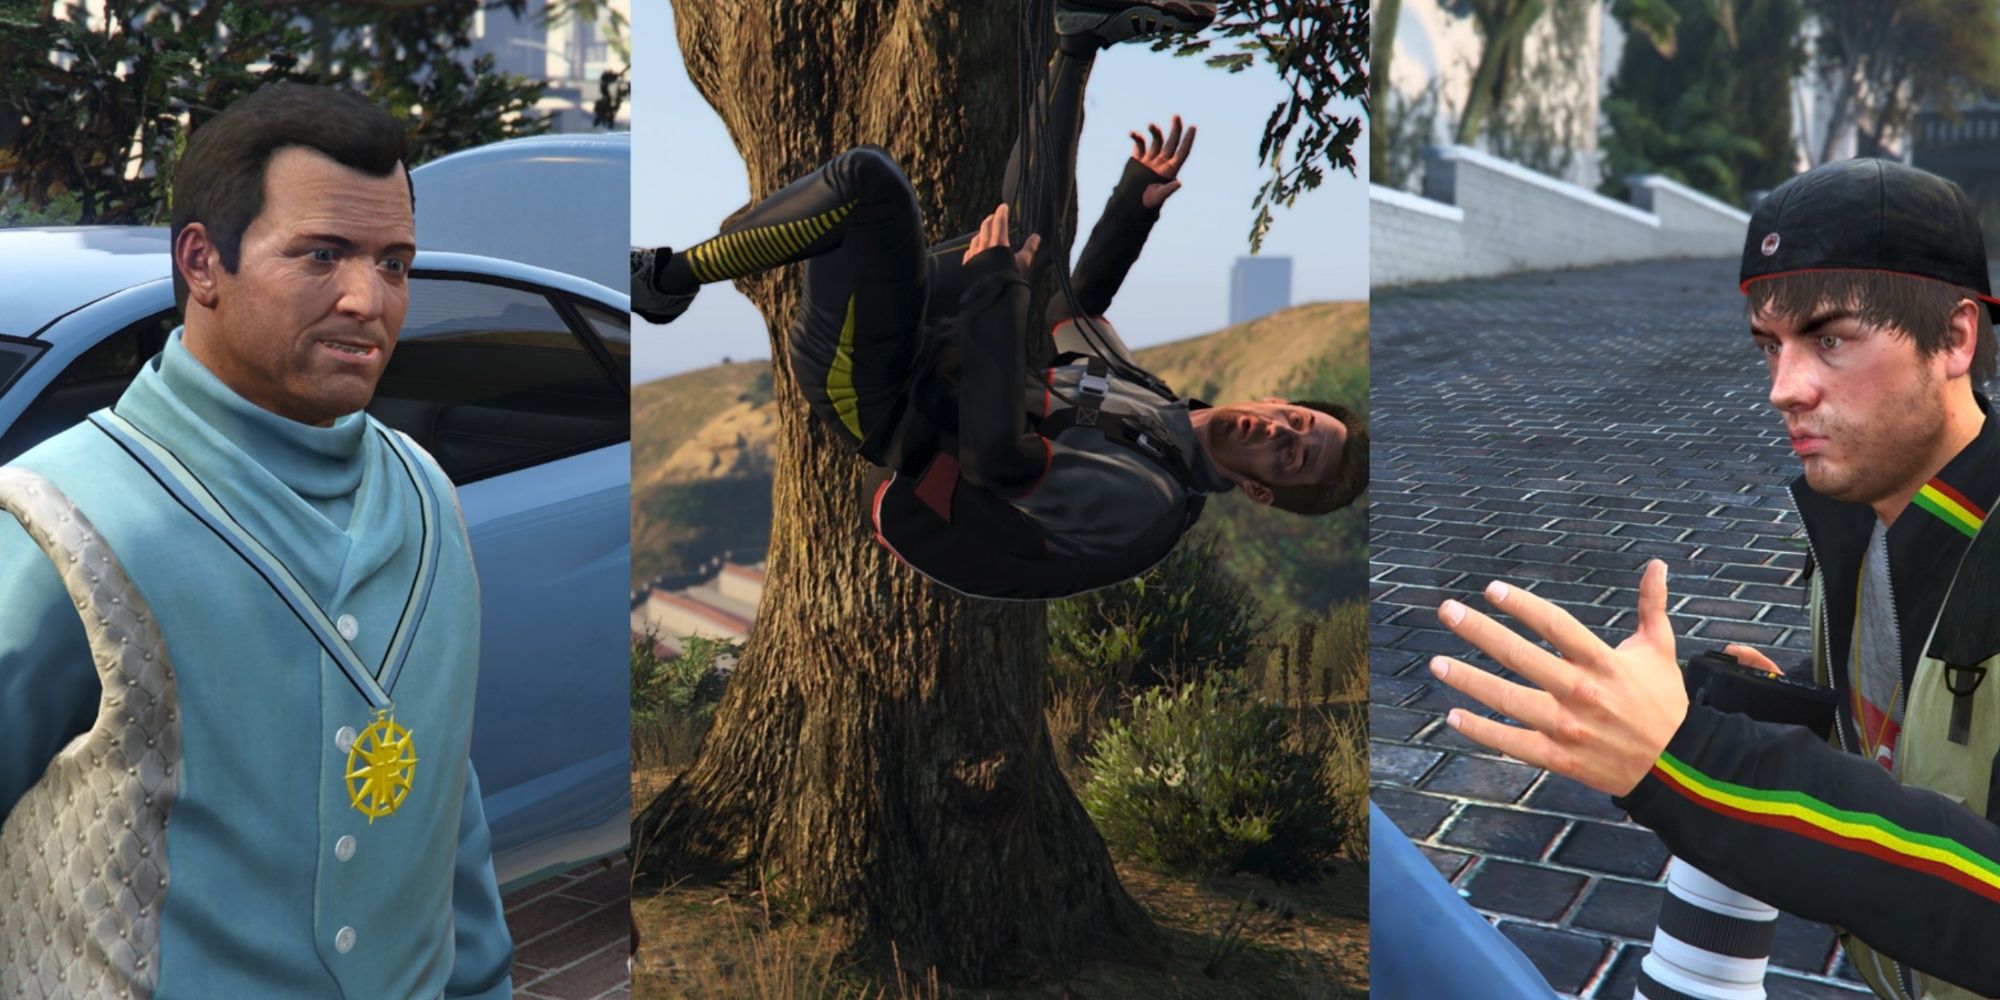 Michael in the final Epsilon Program quest, Dom's introduction, and Beverly's second mission in GTA5